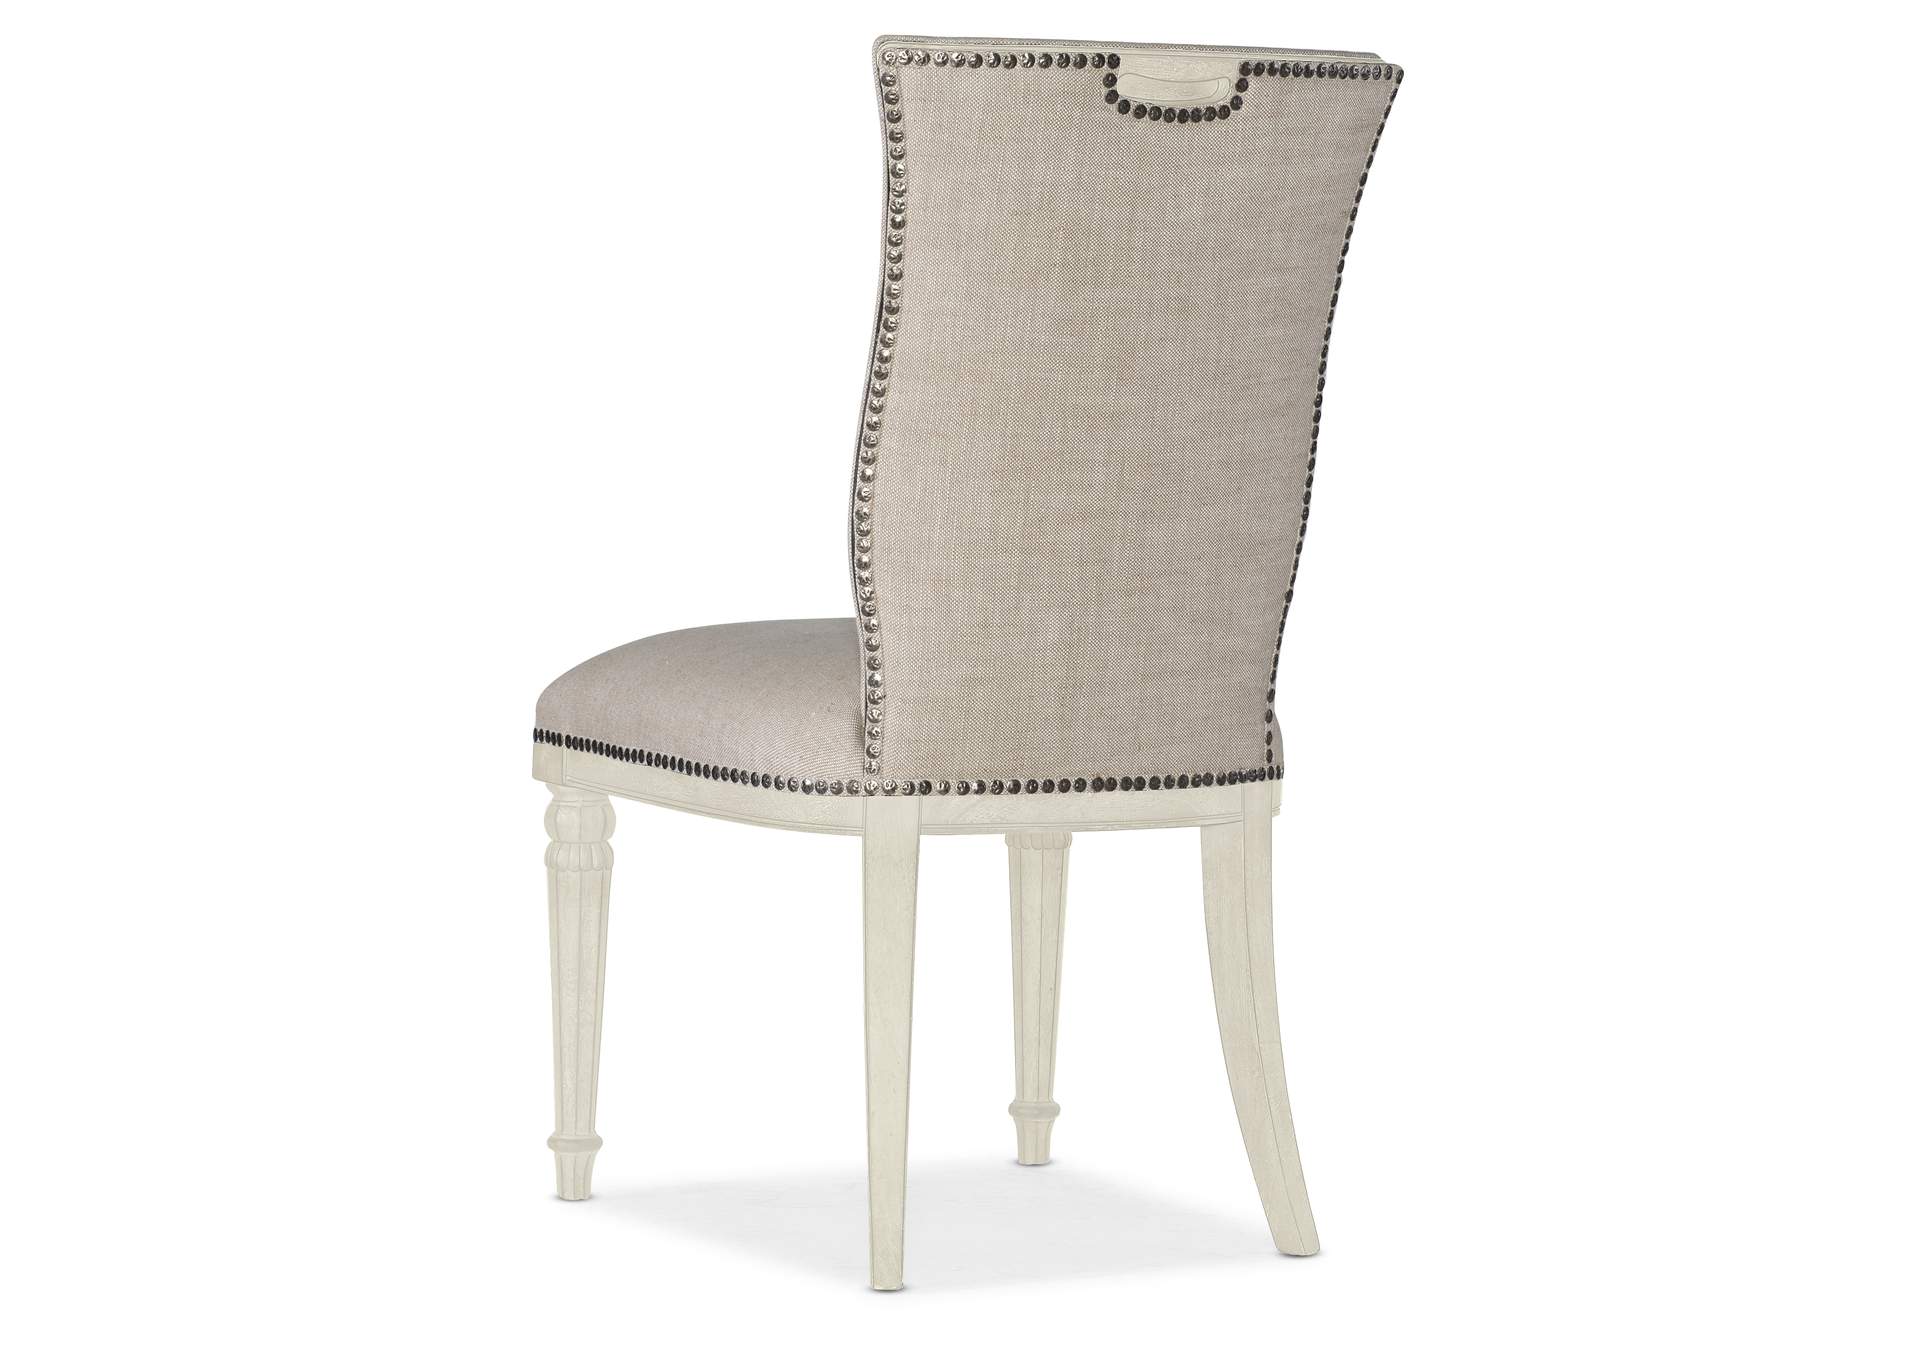 Traditions Upholstered Side Chair 2 Per Carton - Price Ea,Hooker Furniture